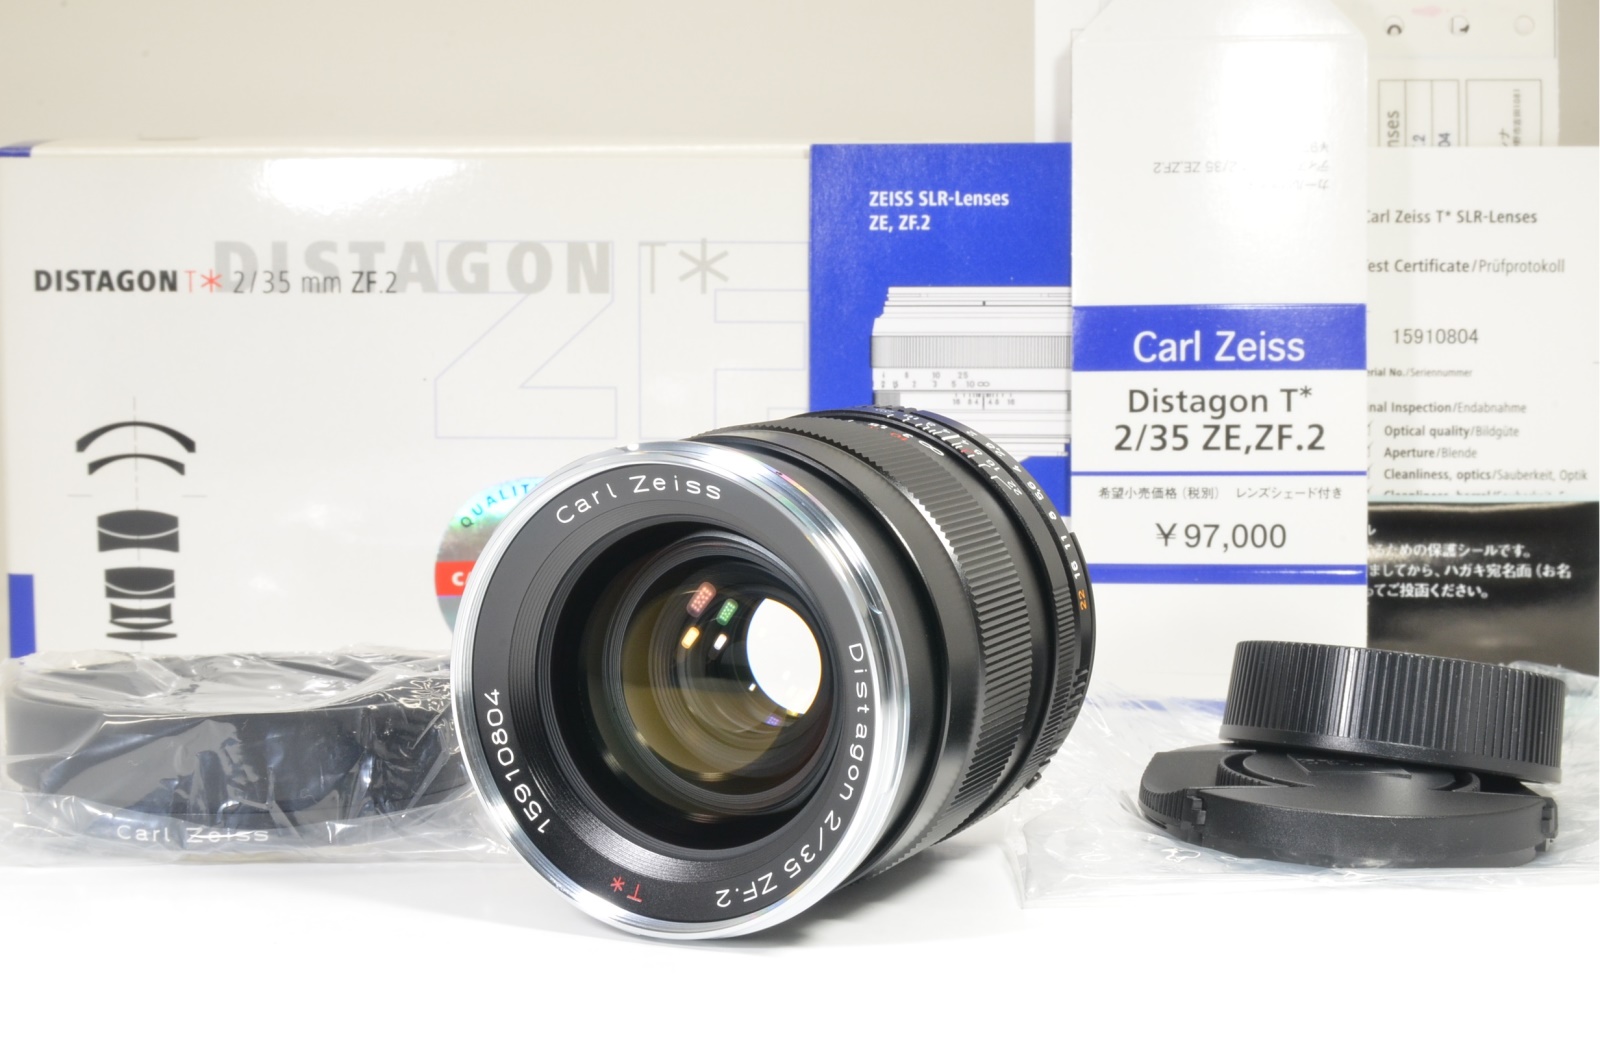 carl zeiss distagon t* 35mm f2 zf.2 lens for nikon f mount never used top mint